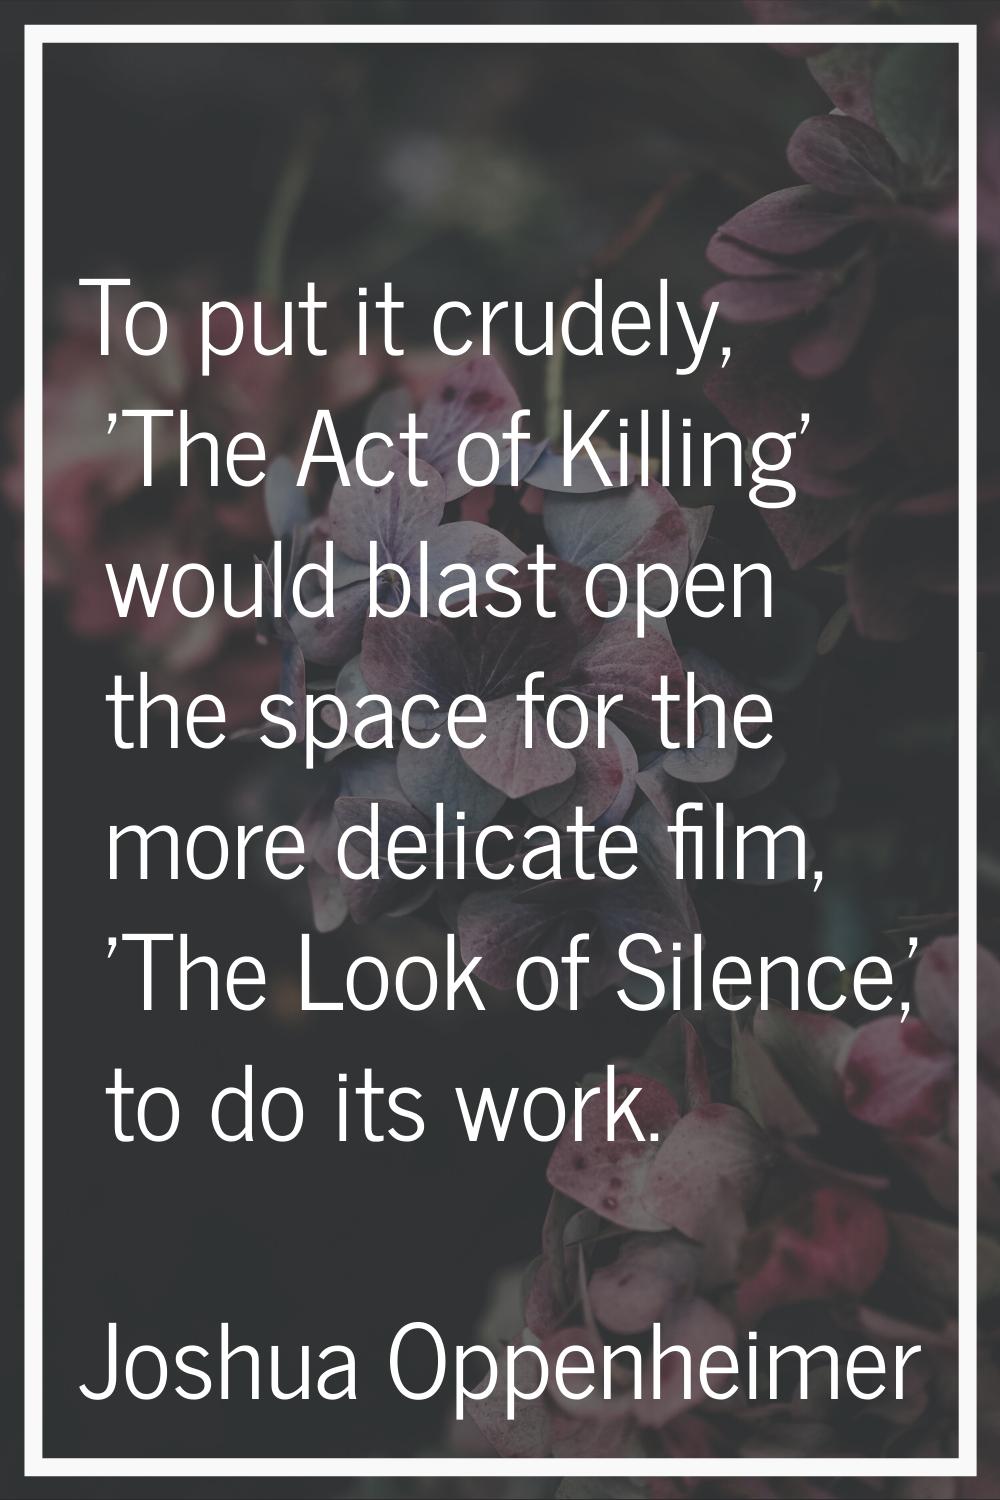 To put it crudely, 'The Act of Killing' would blast open the space for the more delicate film, 'The